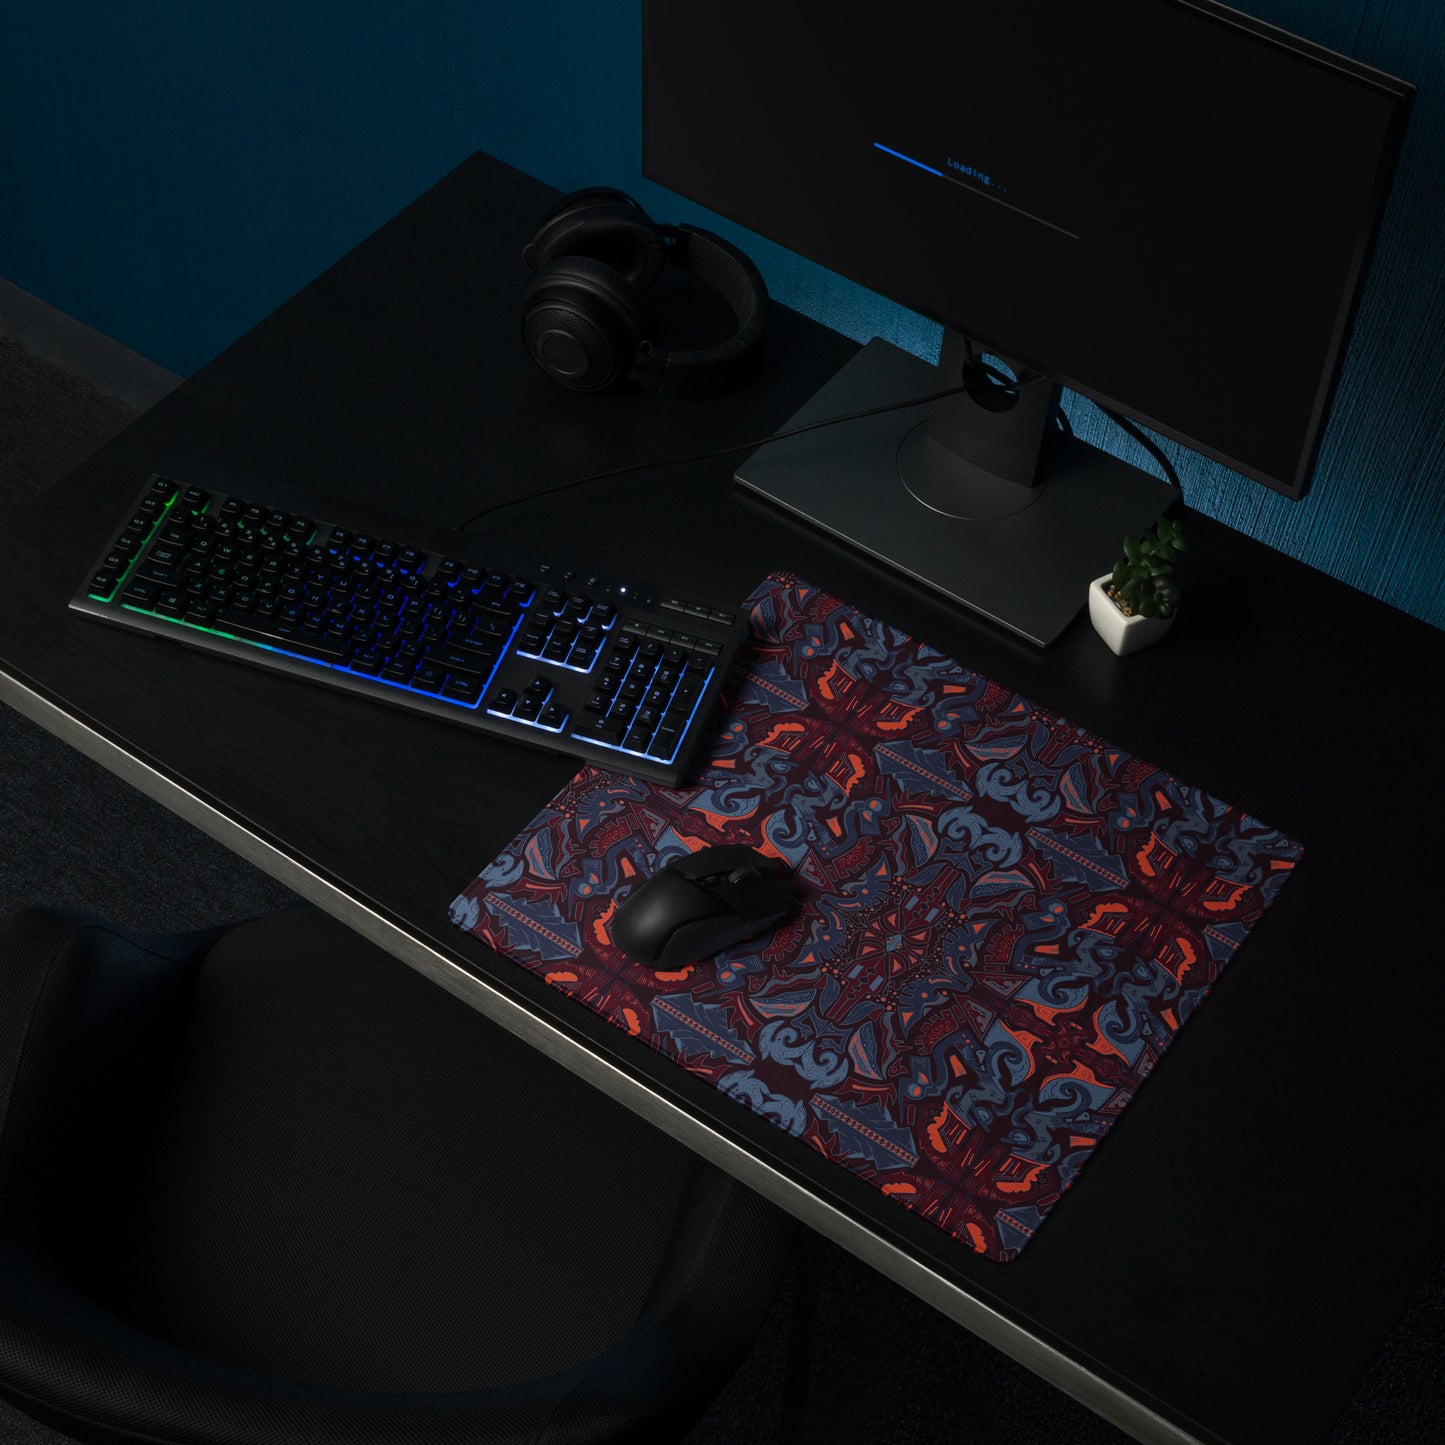 Many Paths's Gaming mouse pad